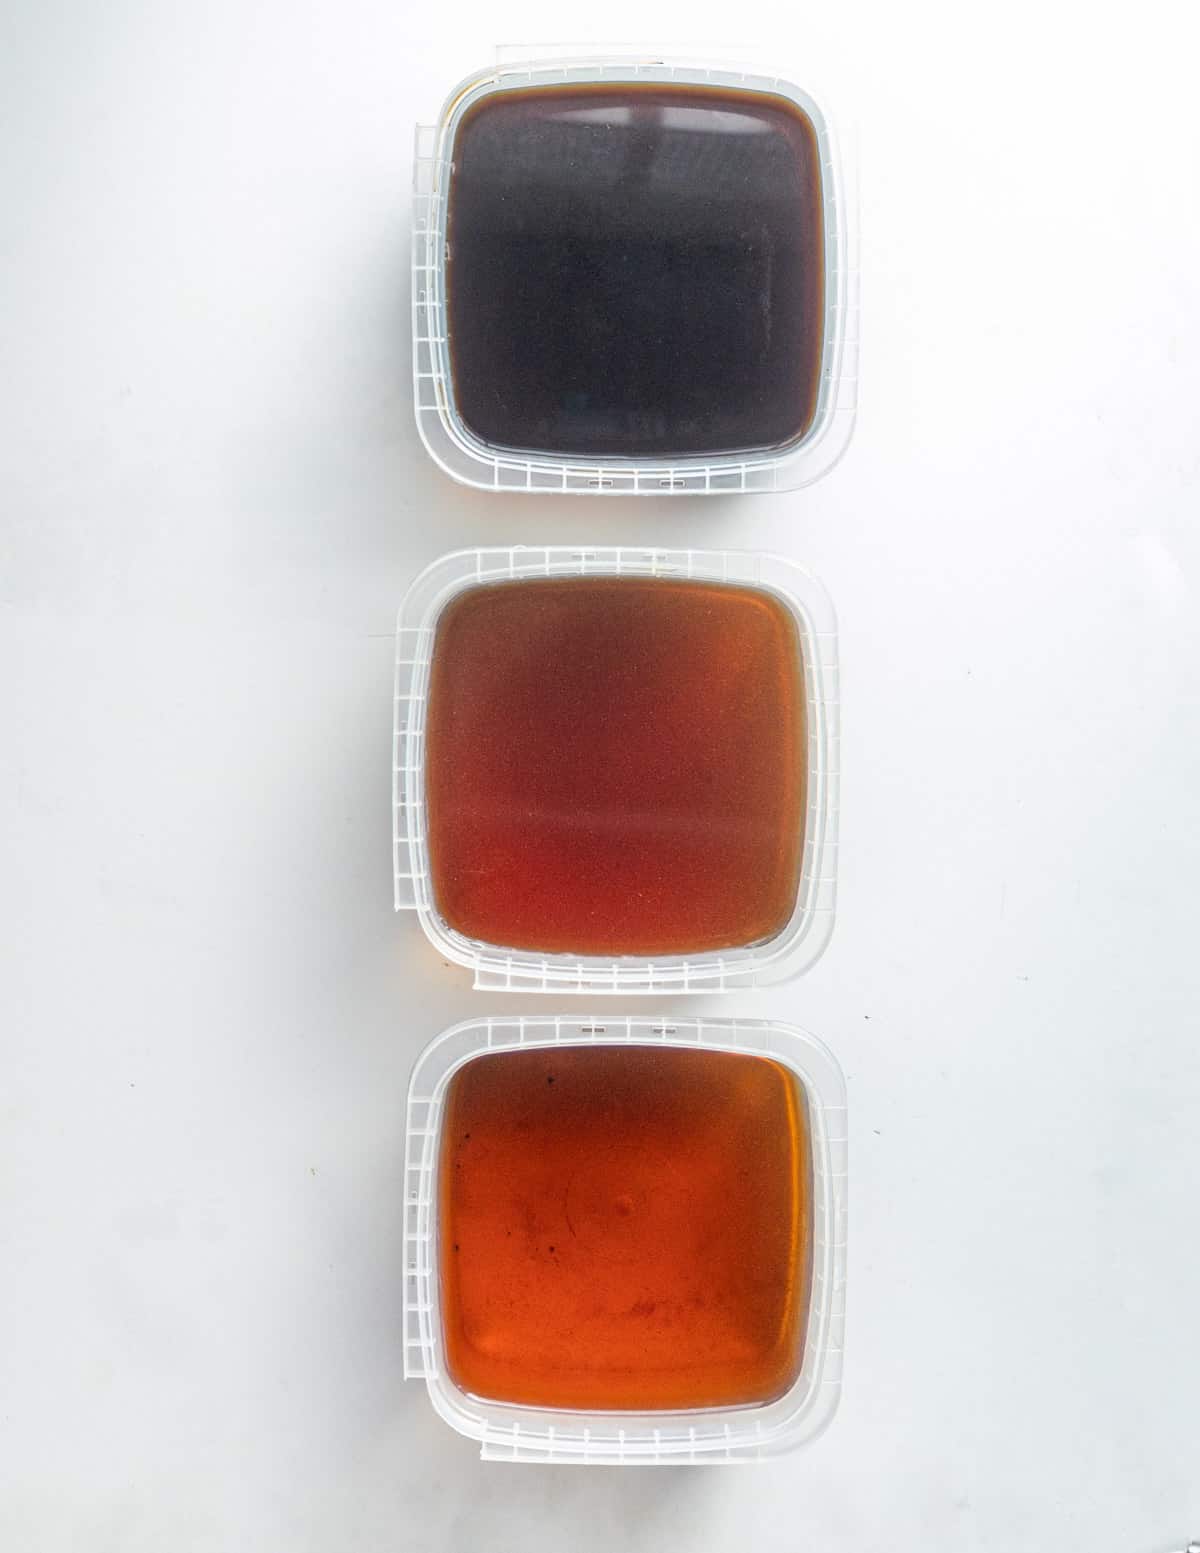 Three different batches of chaga tea made from the same chunk of chaga. 